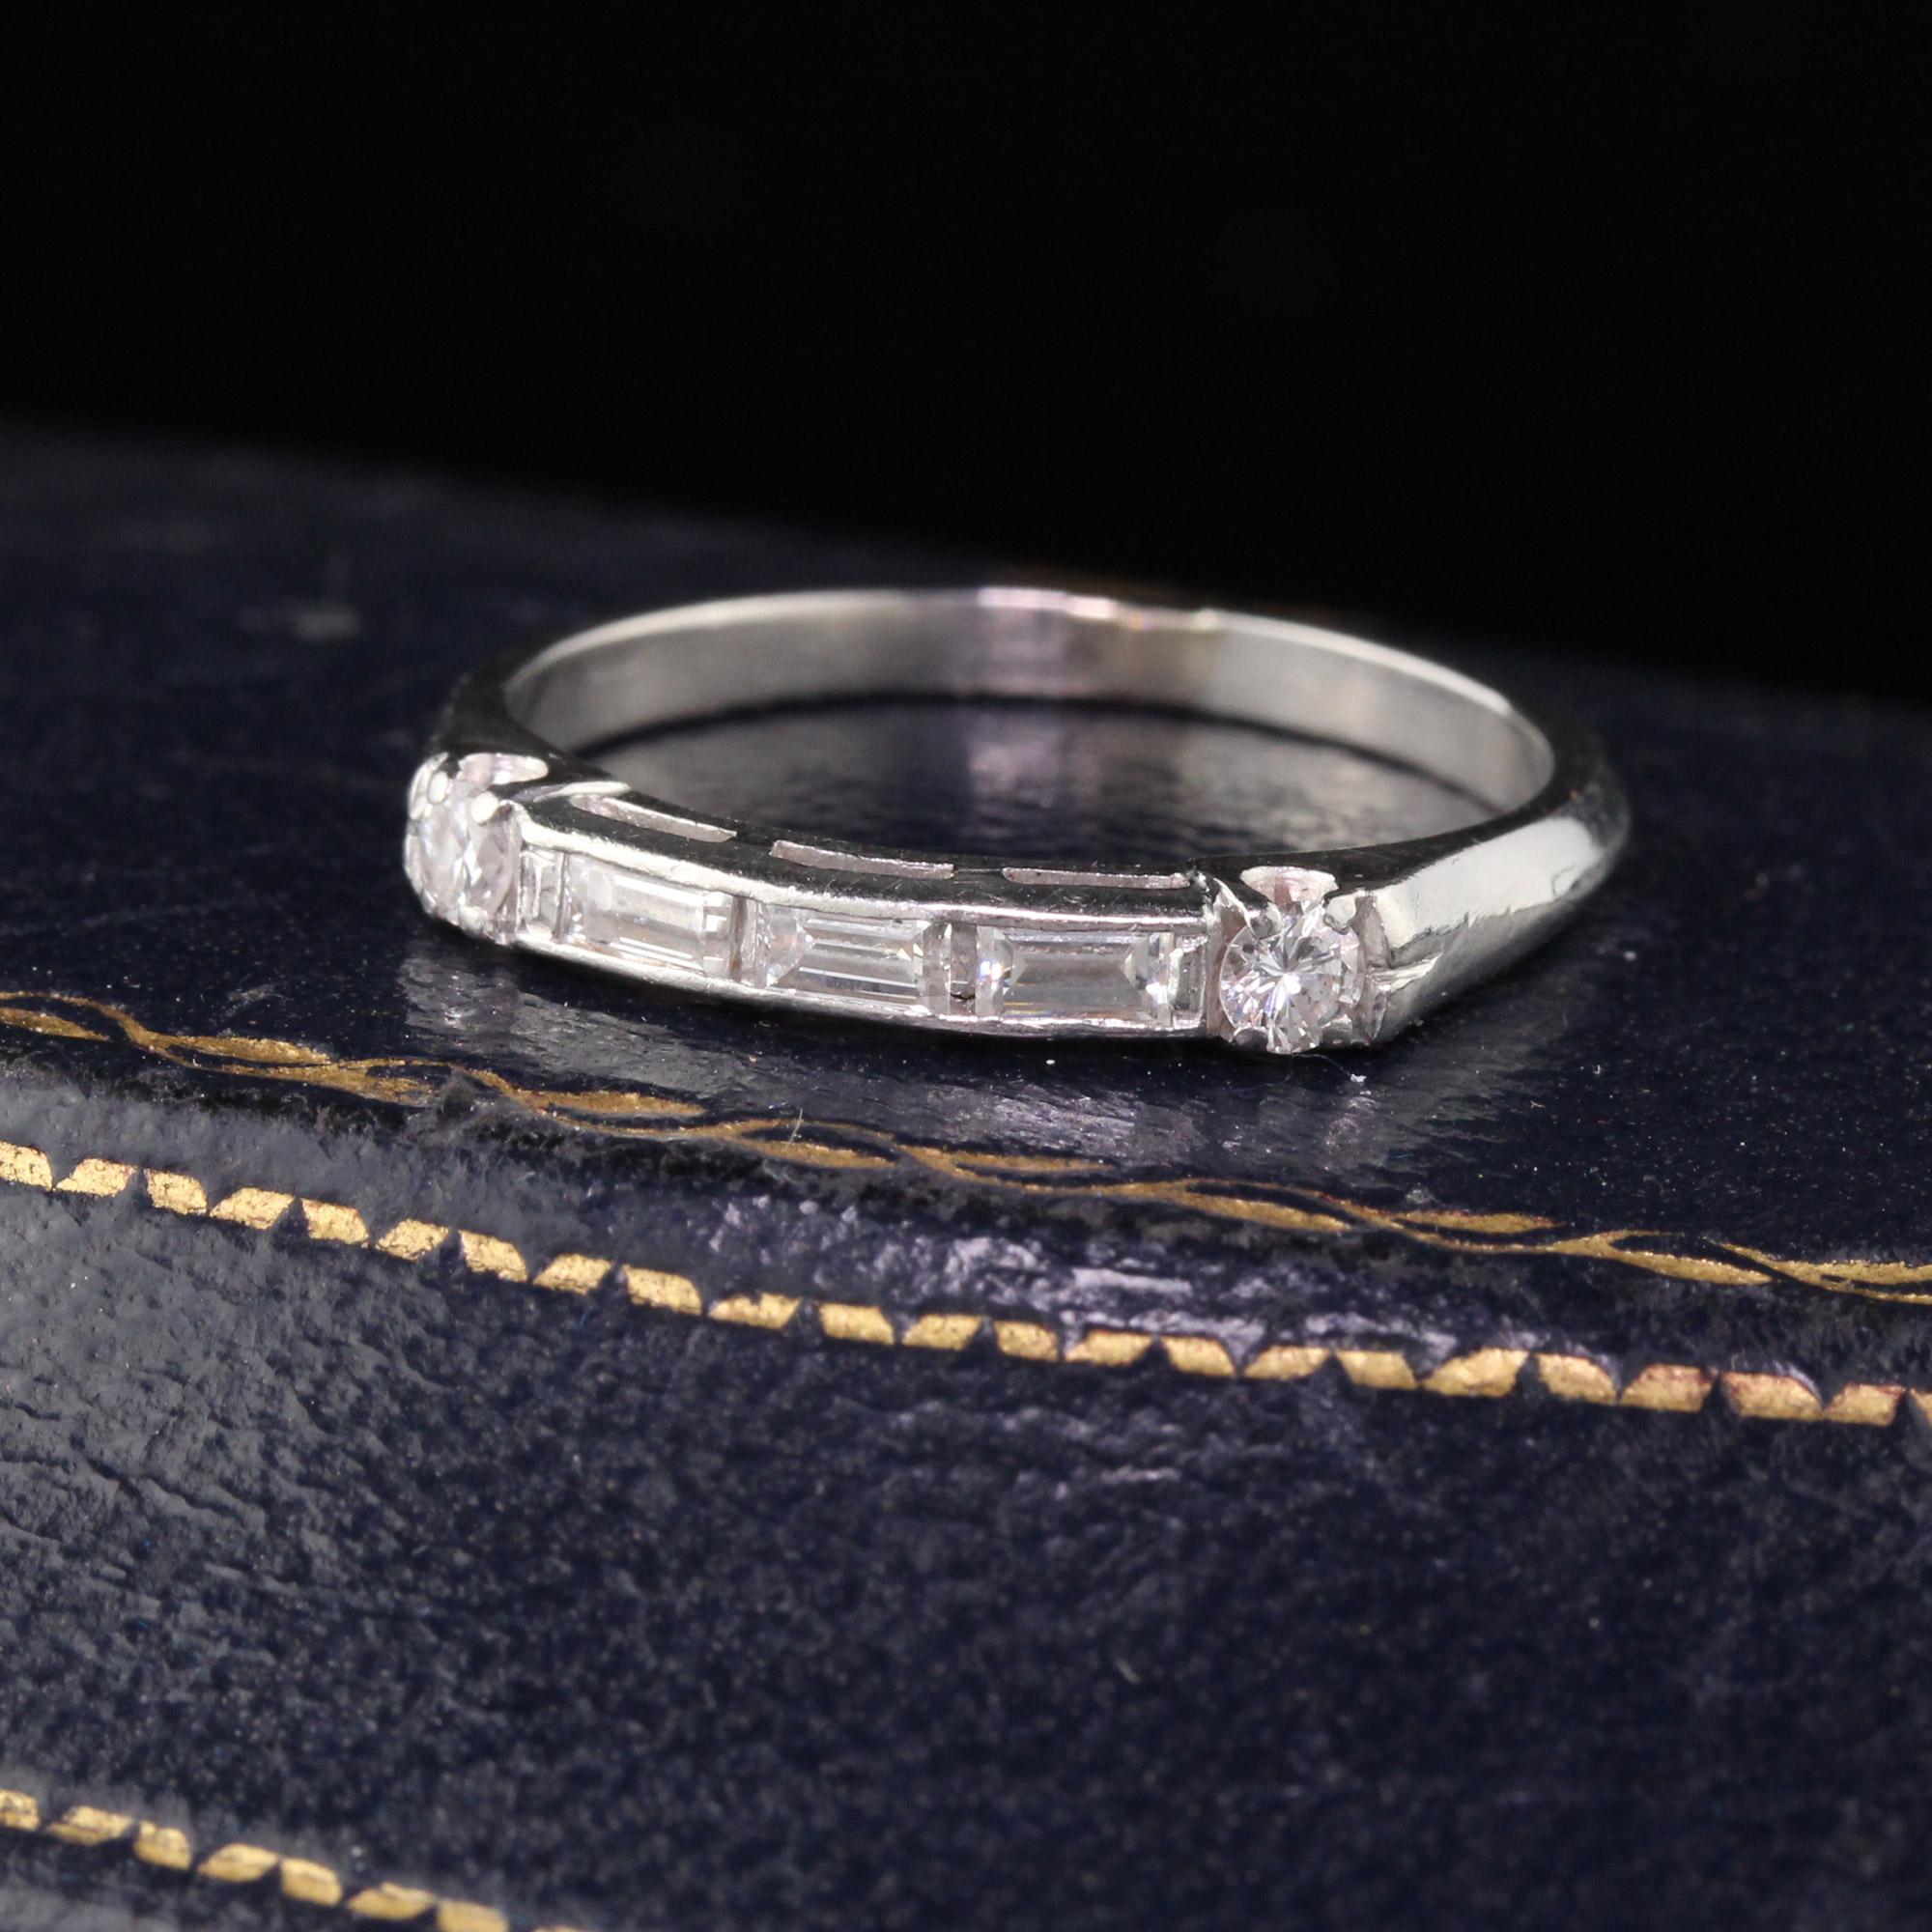 Deco Platinum half eternity band with 3 baguette cut diamonds set horizontally and a single cut diamond on either side. Classic!

#R0334

Metal: Platinum

Weight: 3.1 Grams

Total Diamond Weight: Approximately 0.40 cts diamonds

Diamond Color: